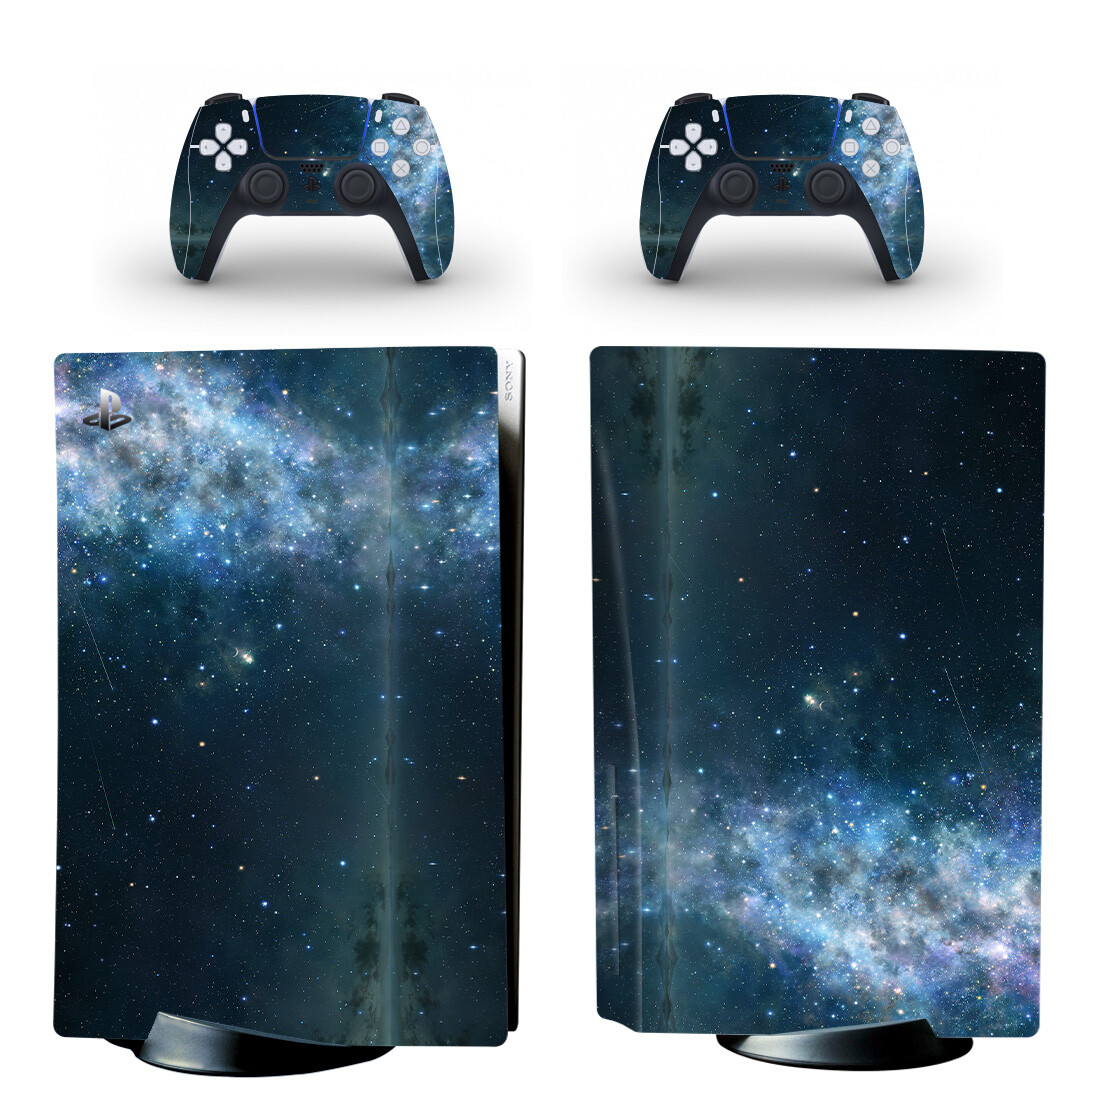 Milky Way Galaxy Skin Sticker For PlayStation 5 And Controllers